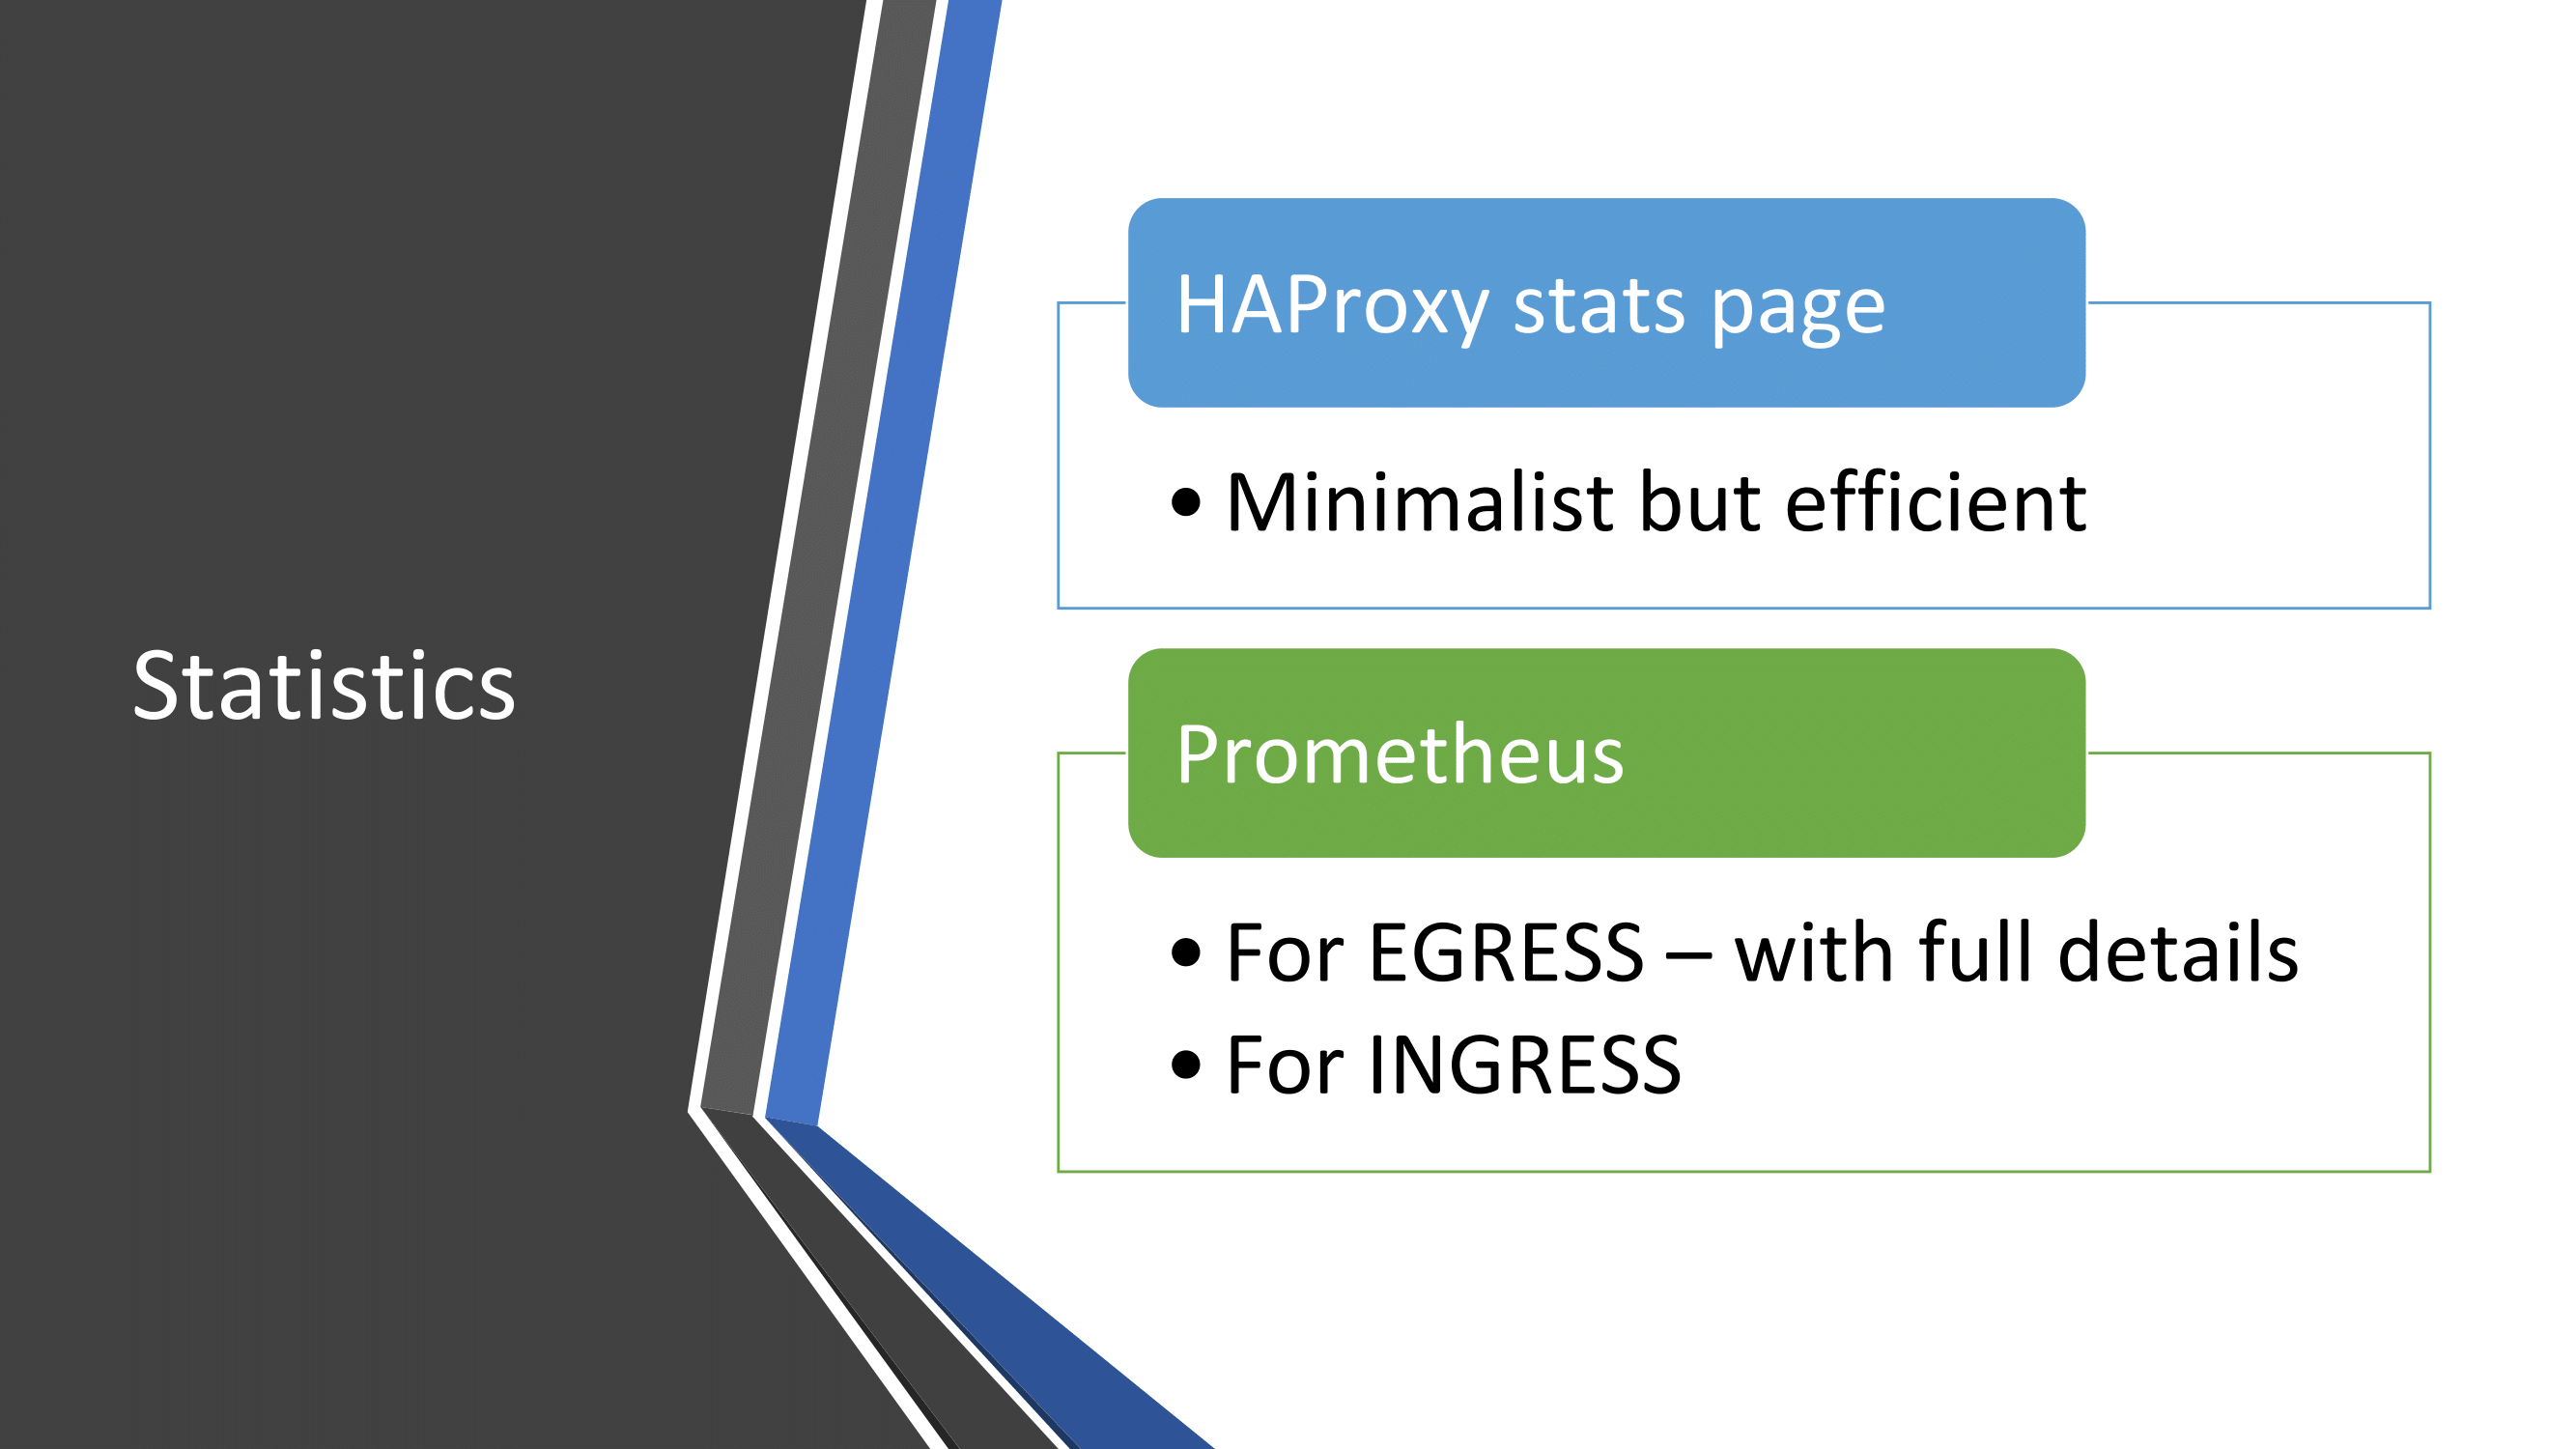 haproxyconf2019_building a service mesh with consul and haproxy_pierre souchay_32